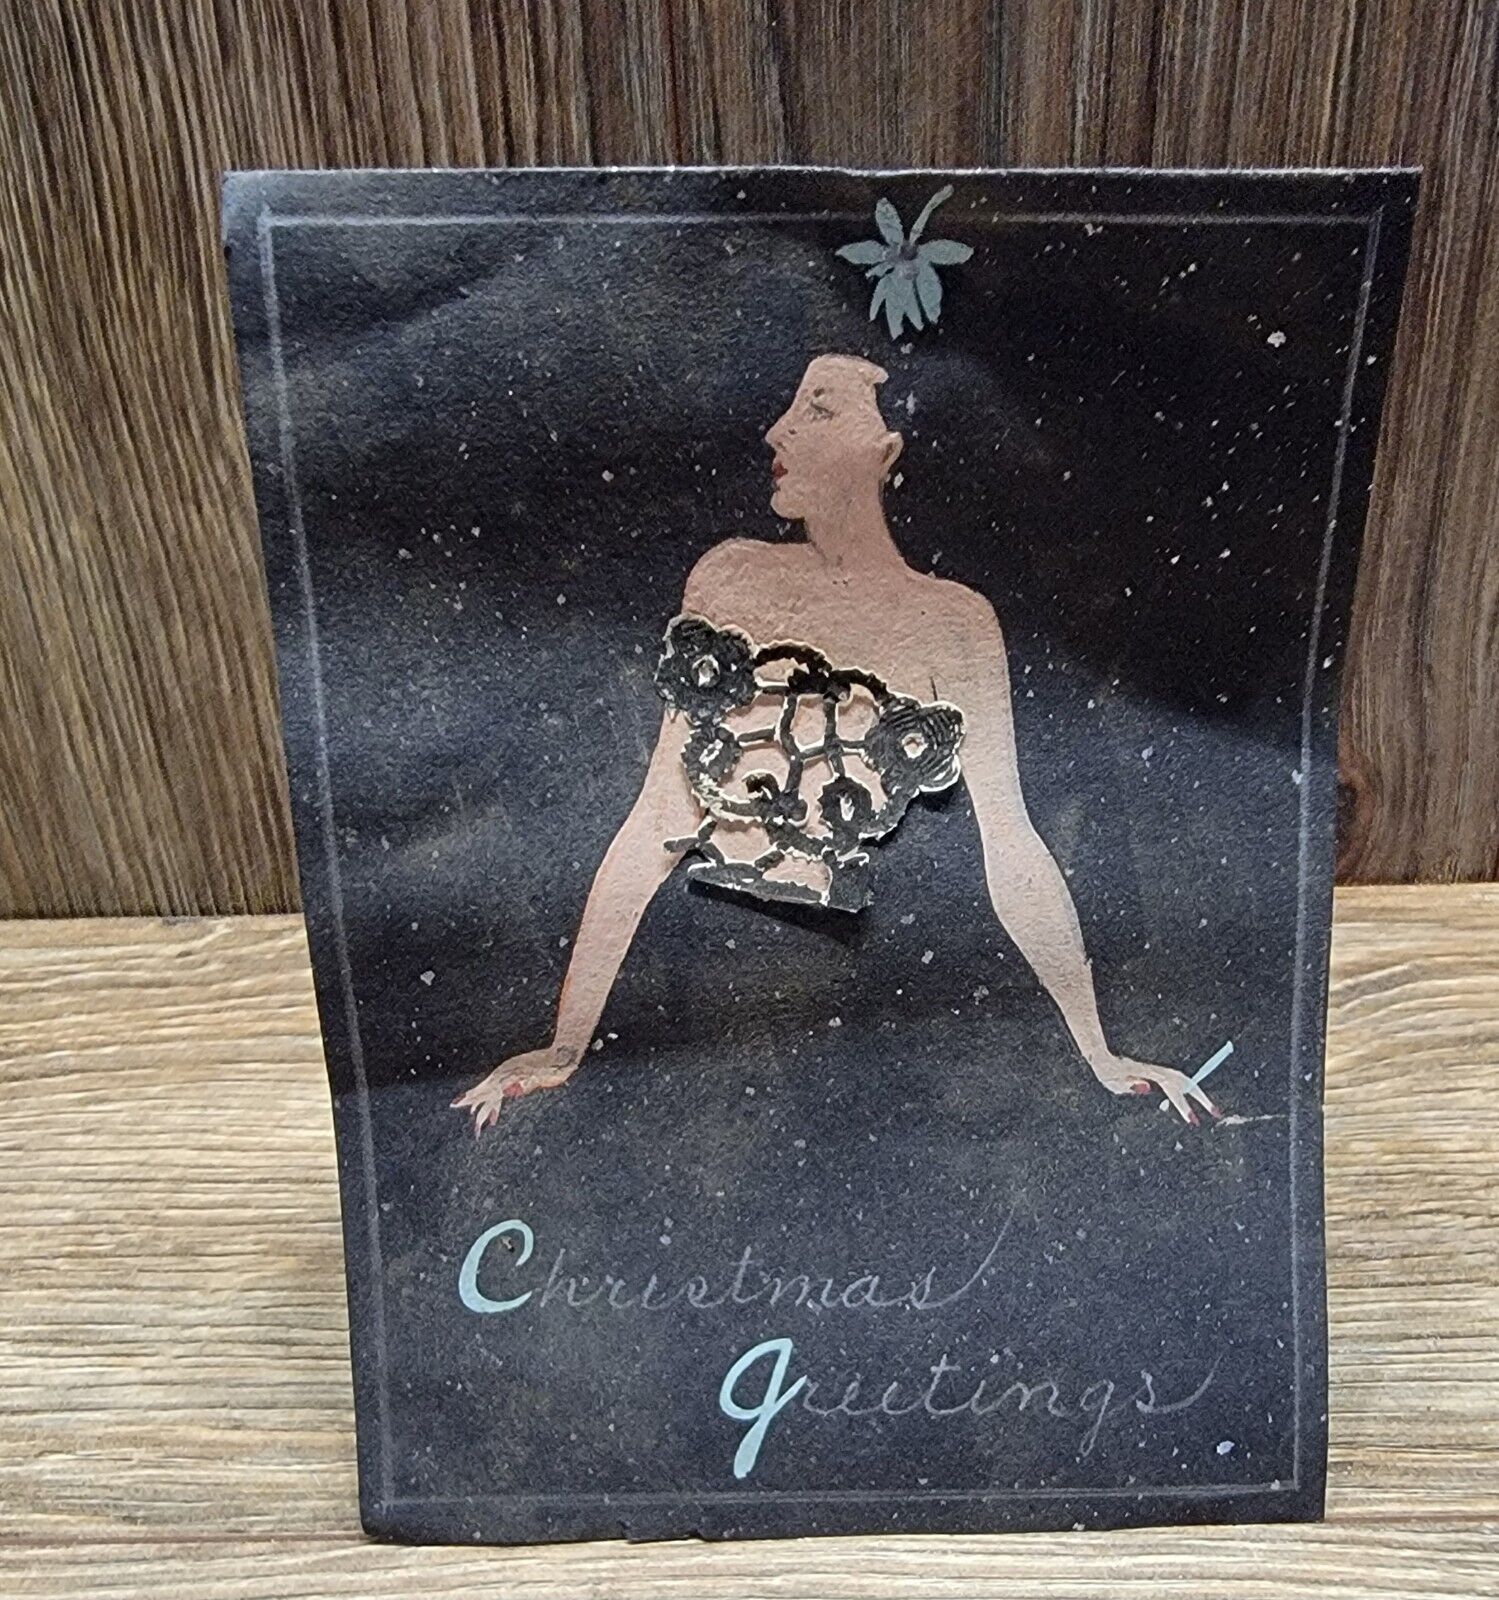 Vintage Risque Christmas Card Hand Painted Woman  W/Corset Christmas Greetings